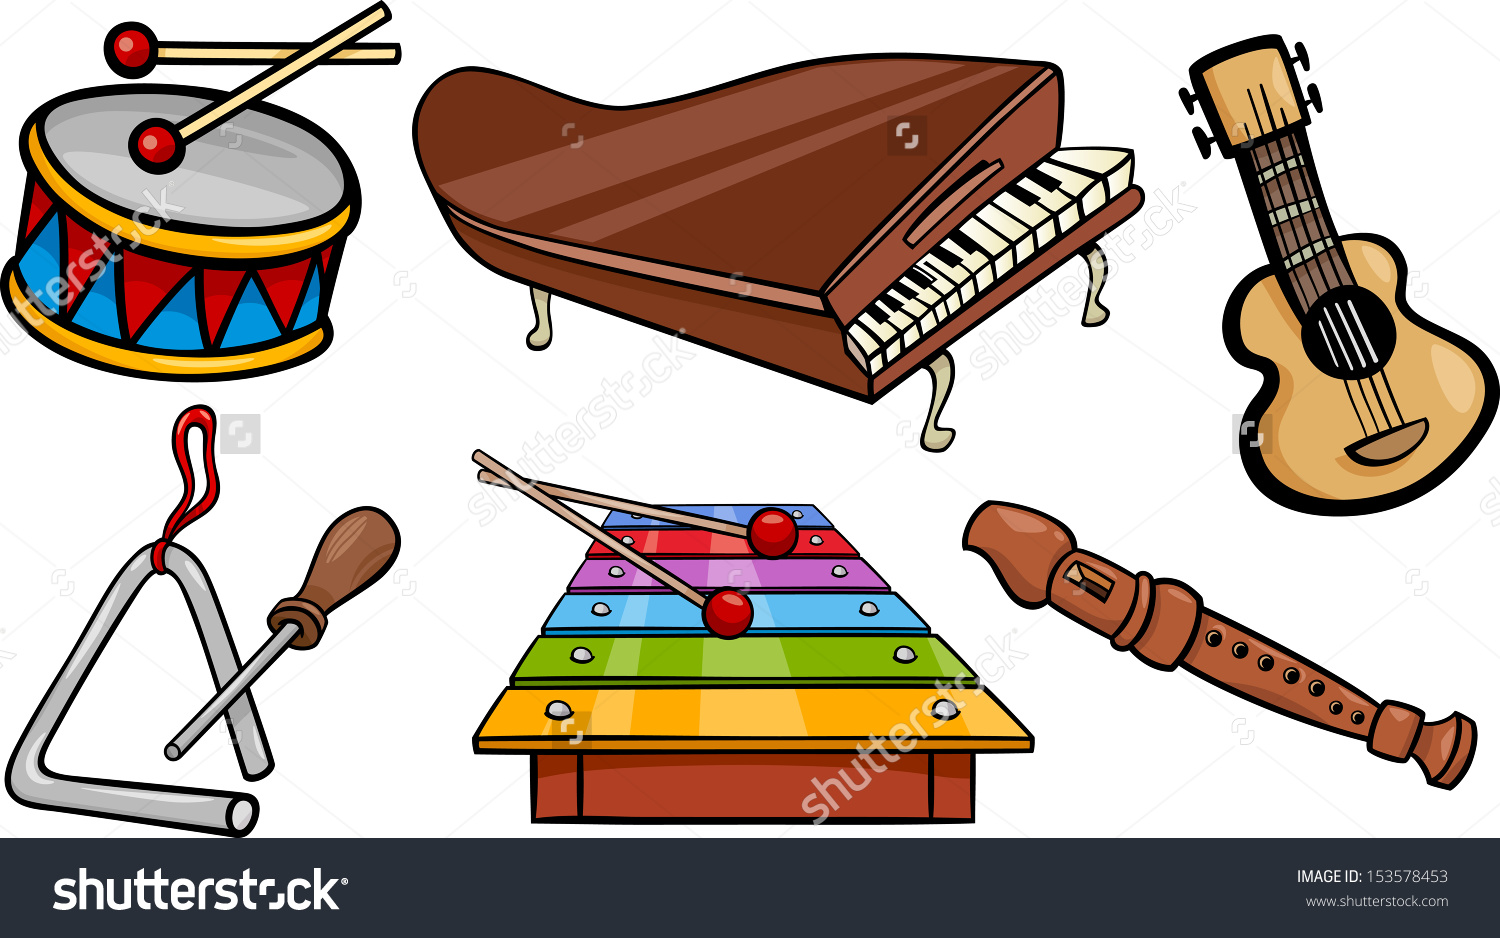 Cartoon Illustration Musical Instruments Objects Clip Stock Vector.